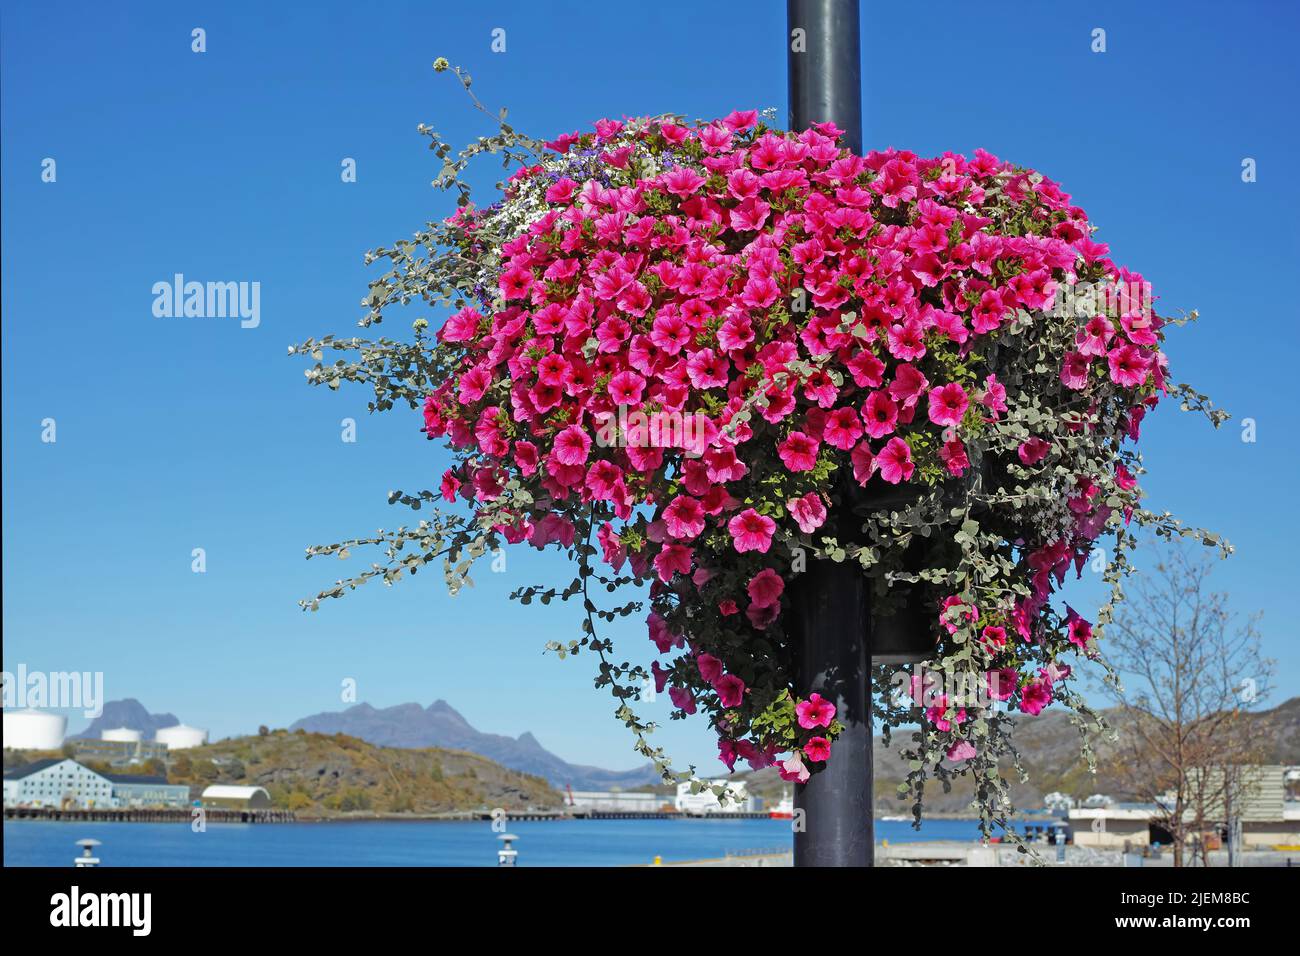 A landscape view of a pink Surfina flower with long vines hanging on a pole. A beautiful image of a cityside street with a pole covered with a pink Stock Photo